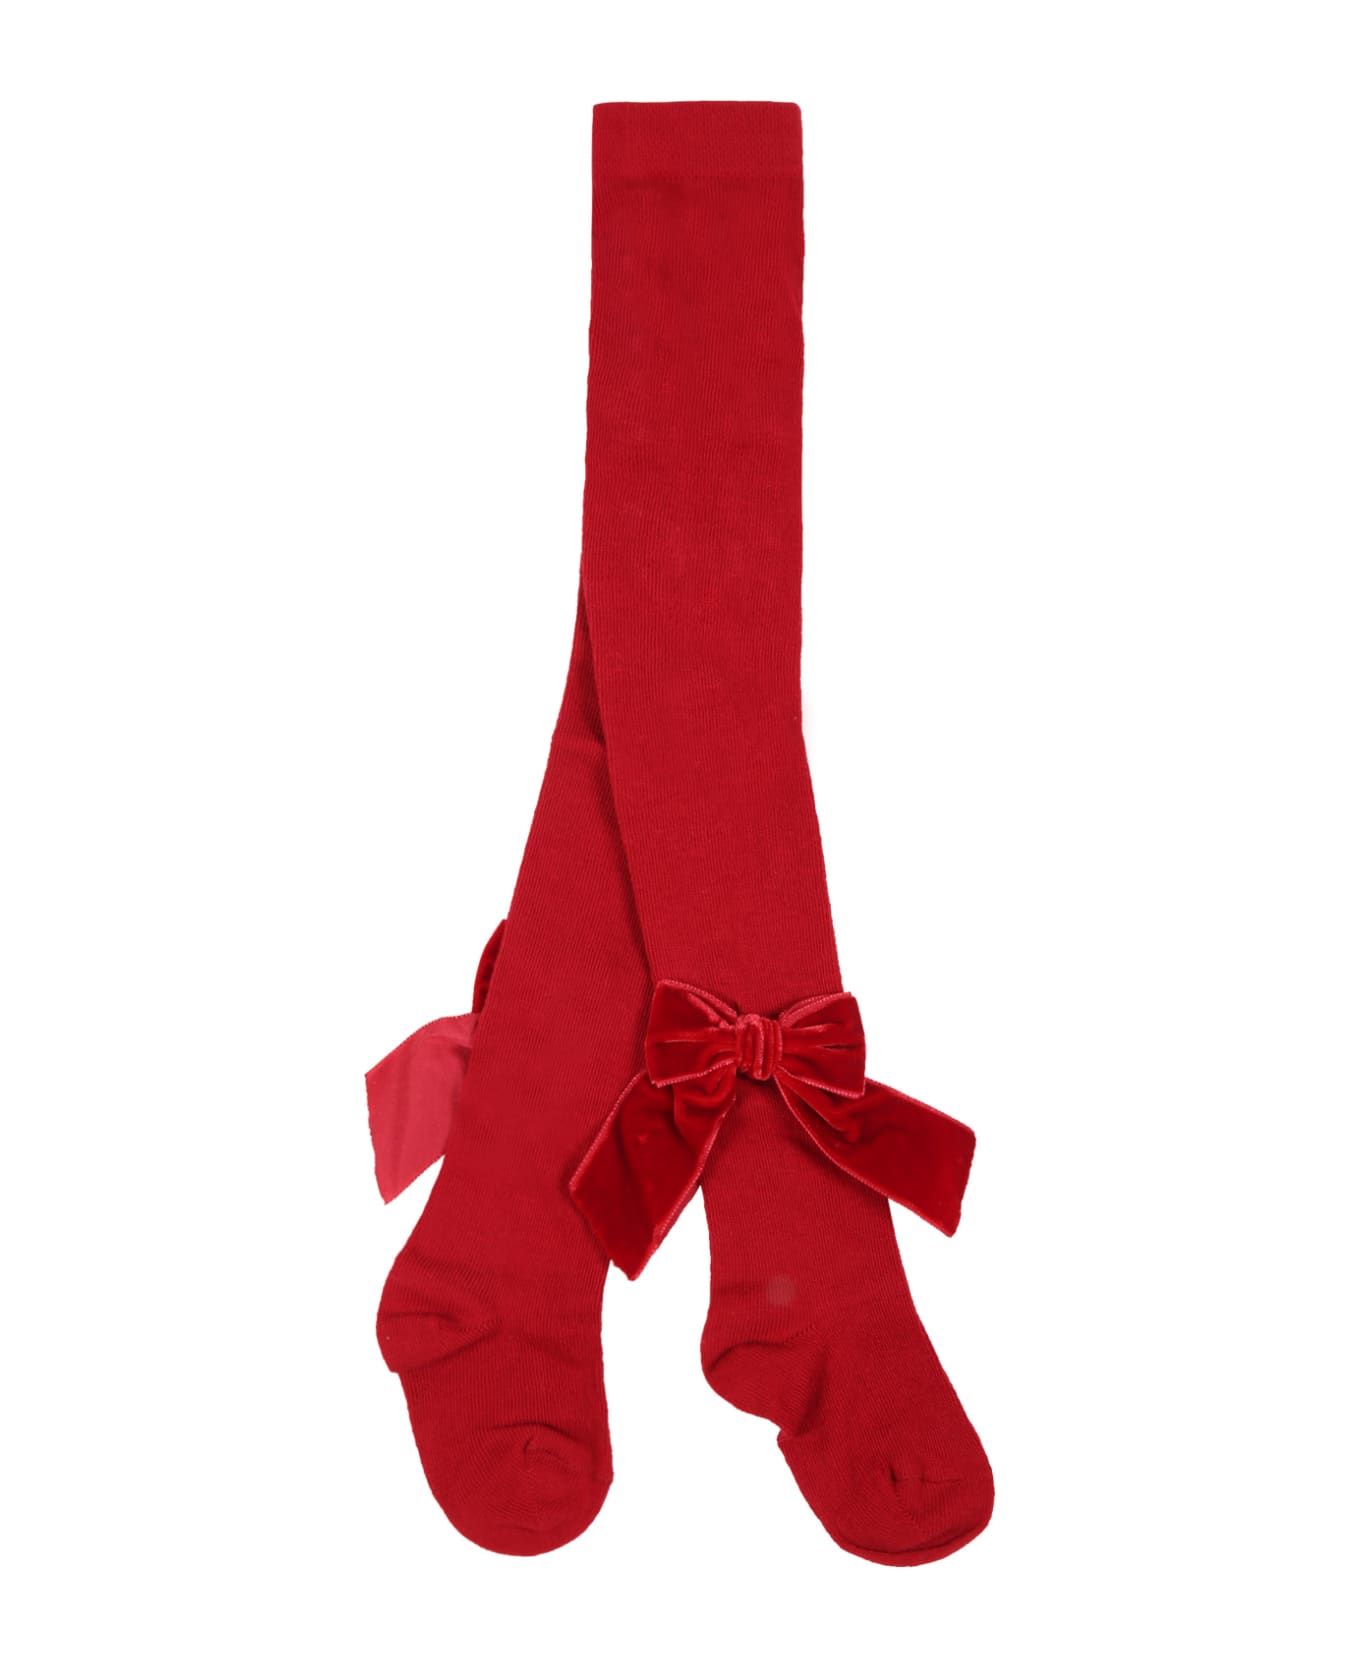 Story Loris Red Tights For Girl With Velvet Bows - Red